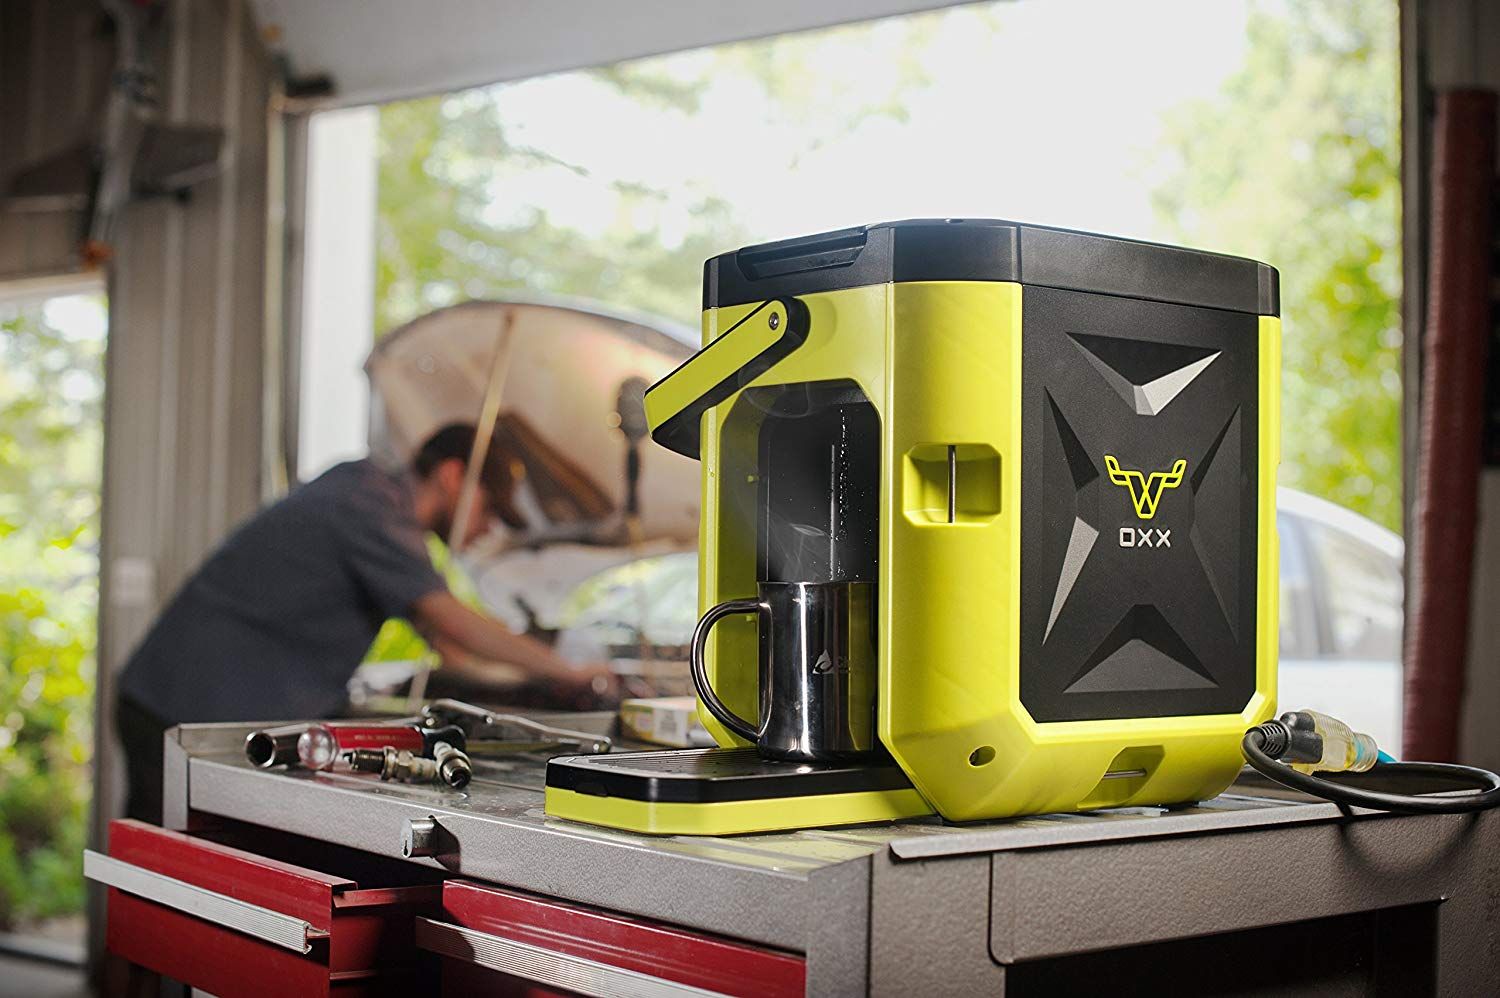 Brew coffee anywhere with this rugged, battery-powered coffee maker